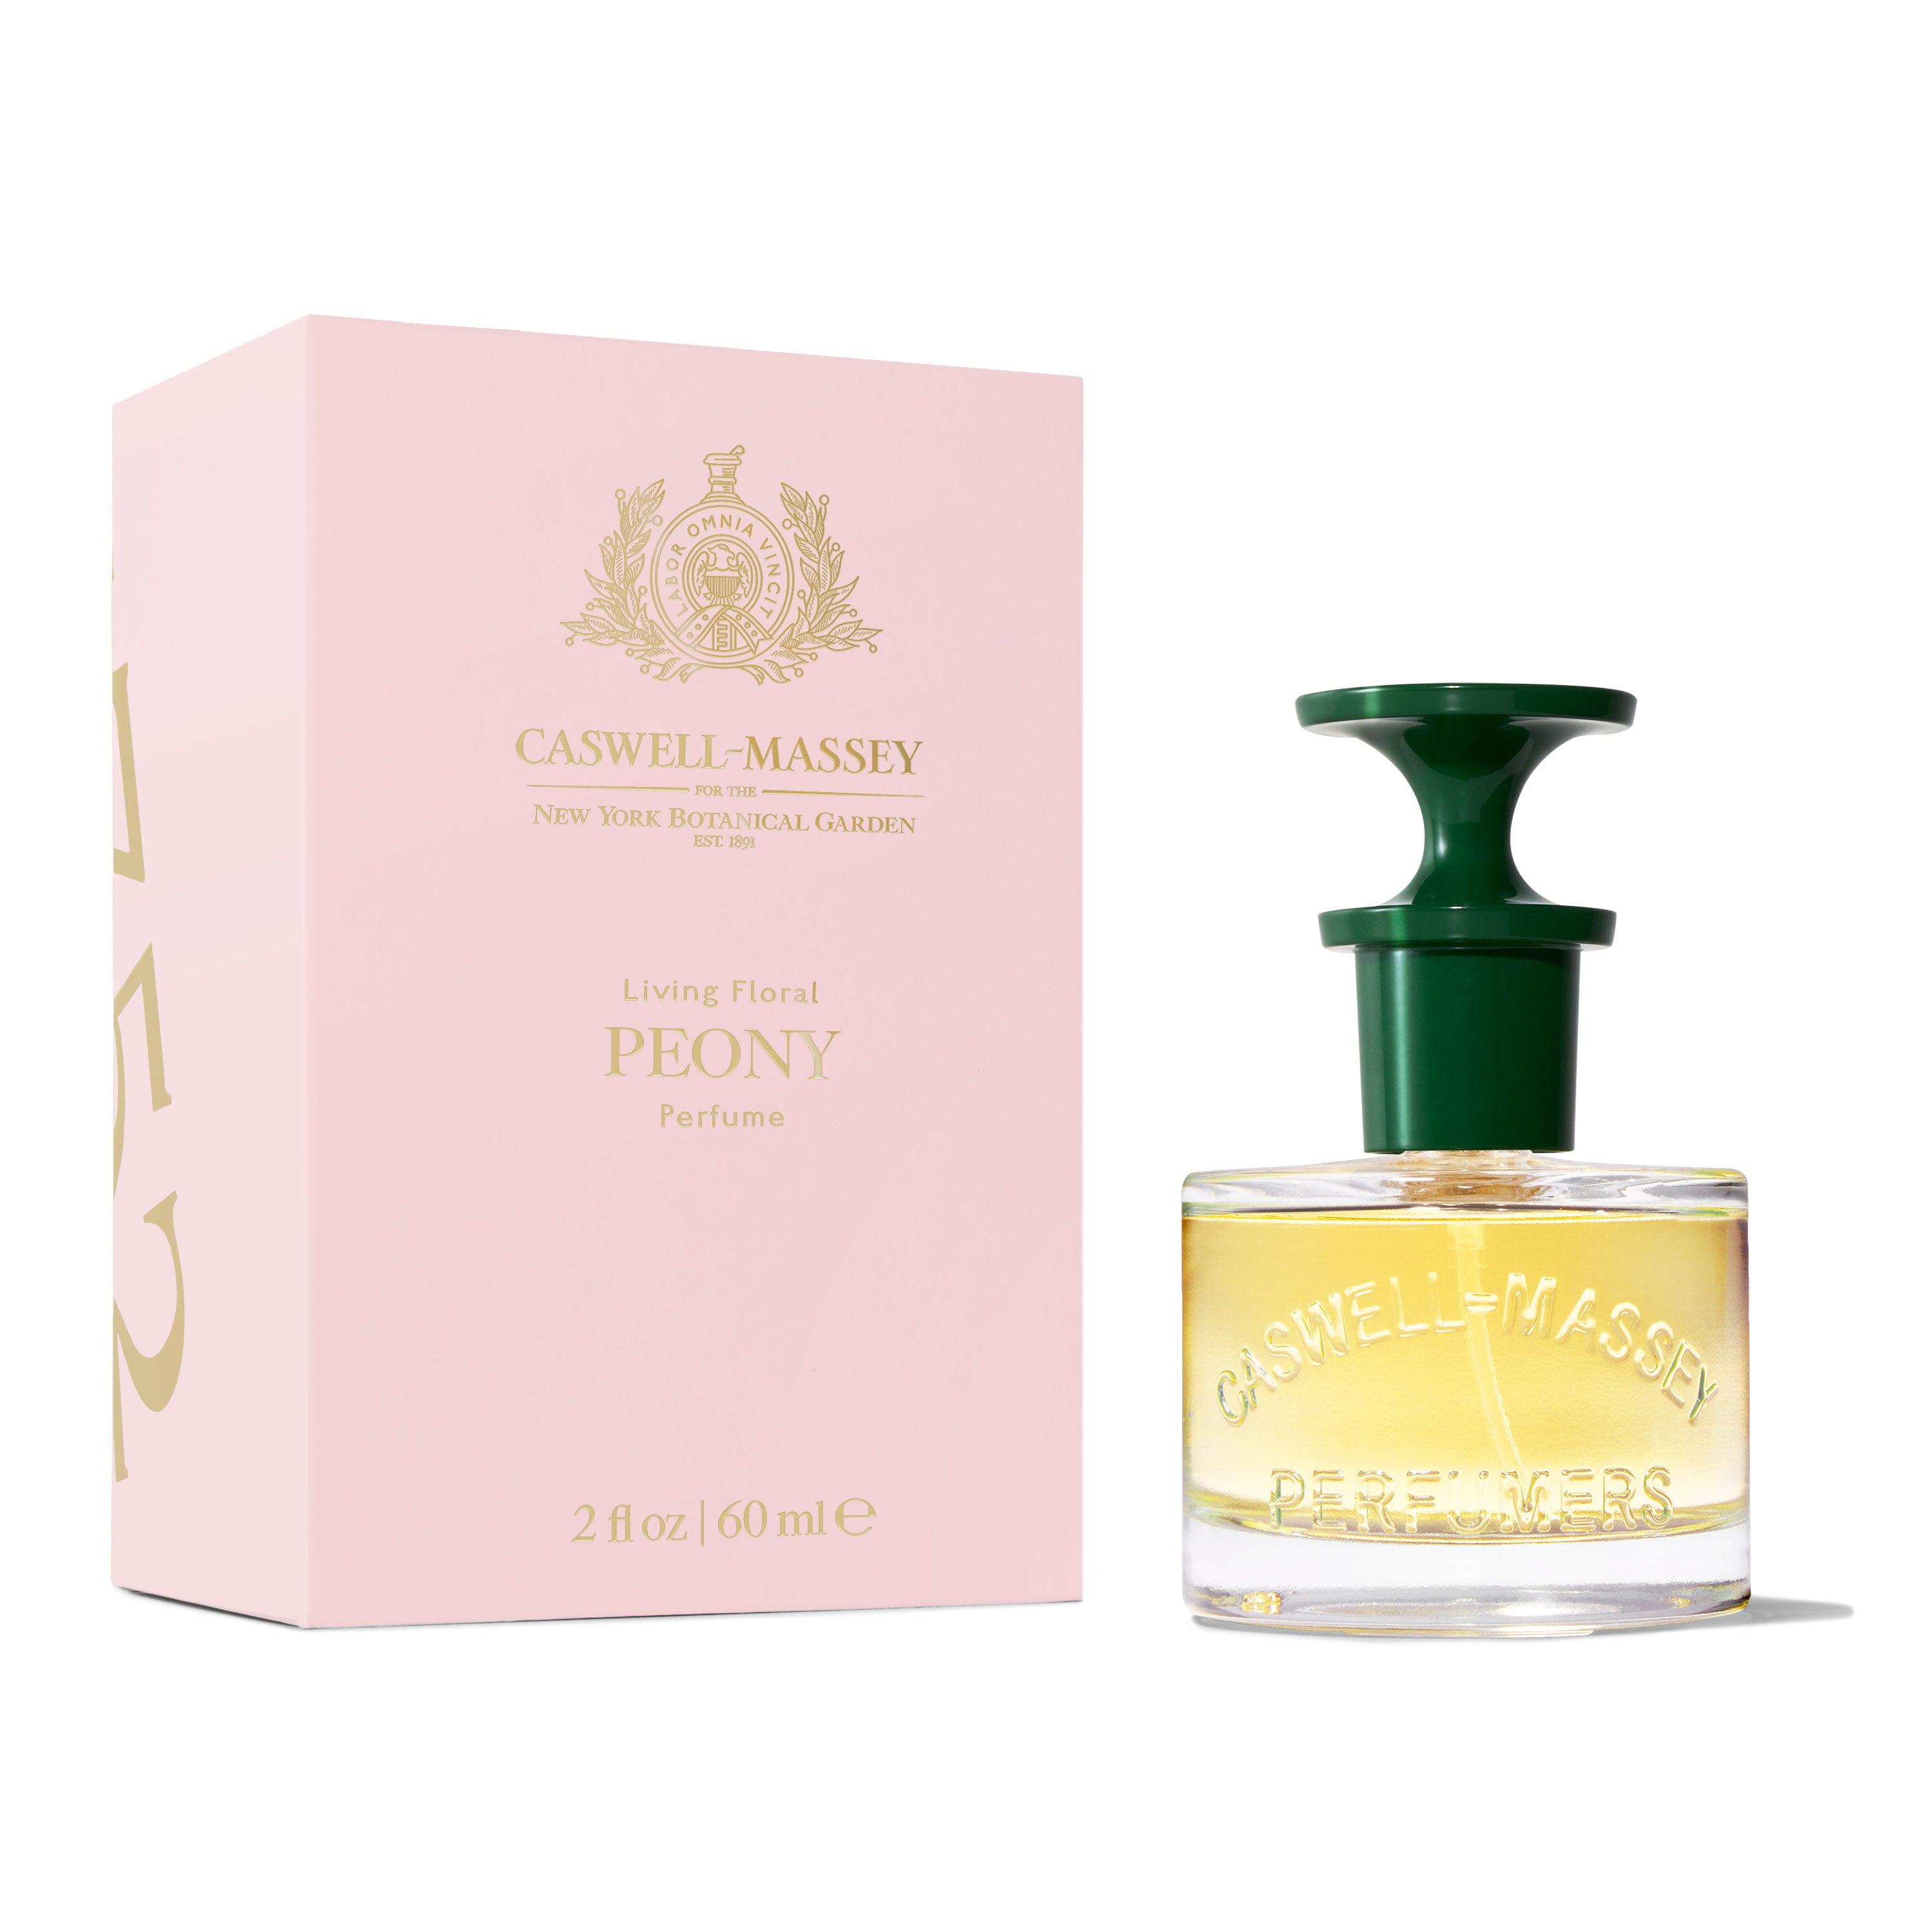 Peony Eau de Parfum, Fine Fragrance by Caswell-Massey 60mL Full Size, shown next to soft pink box